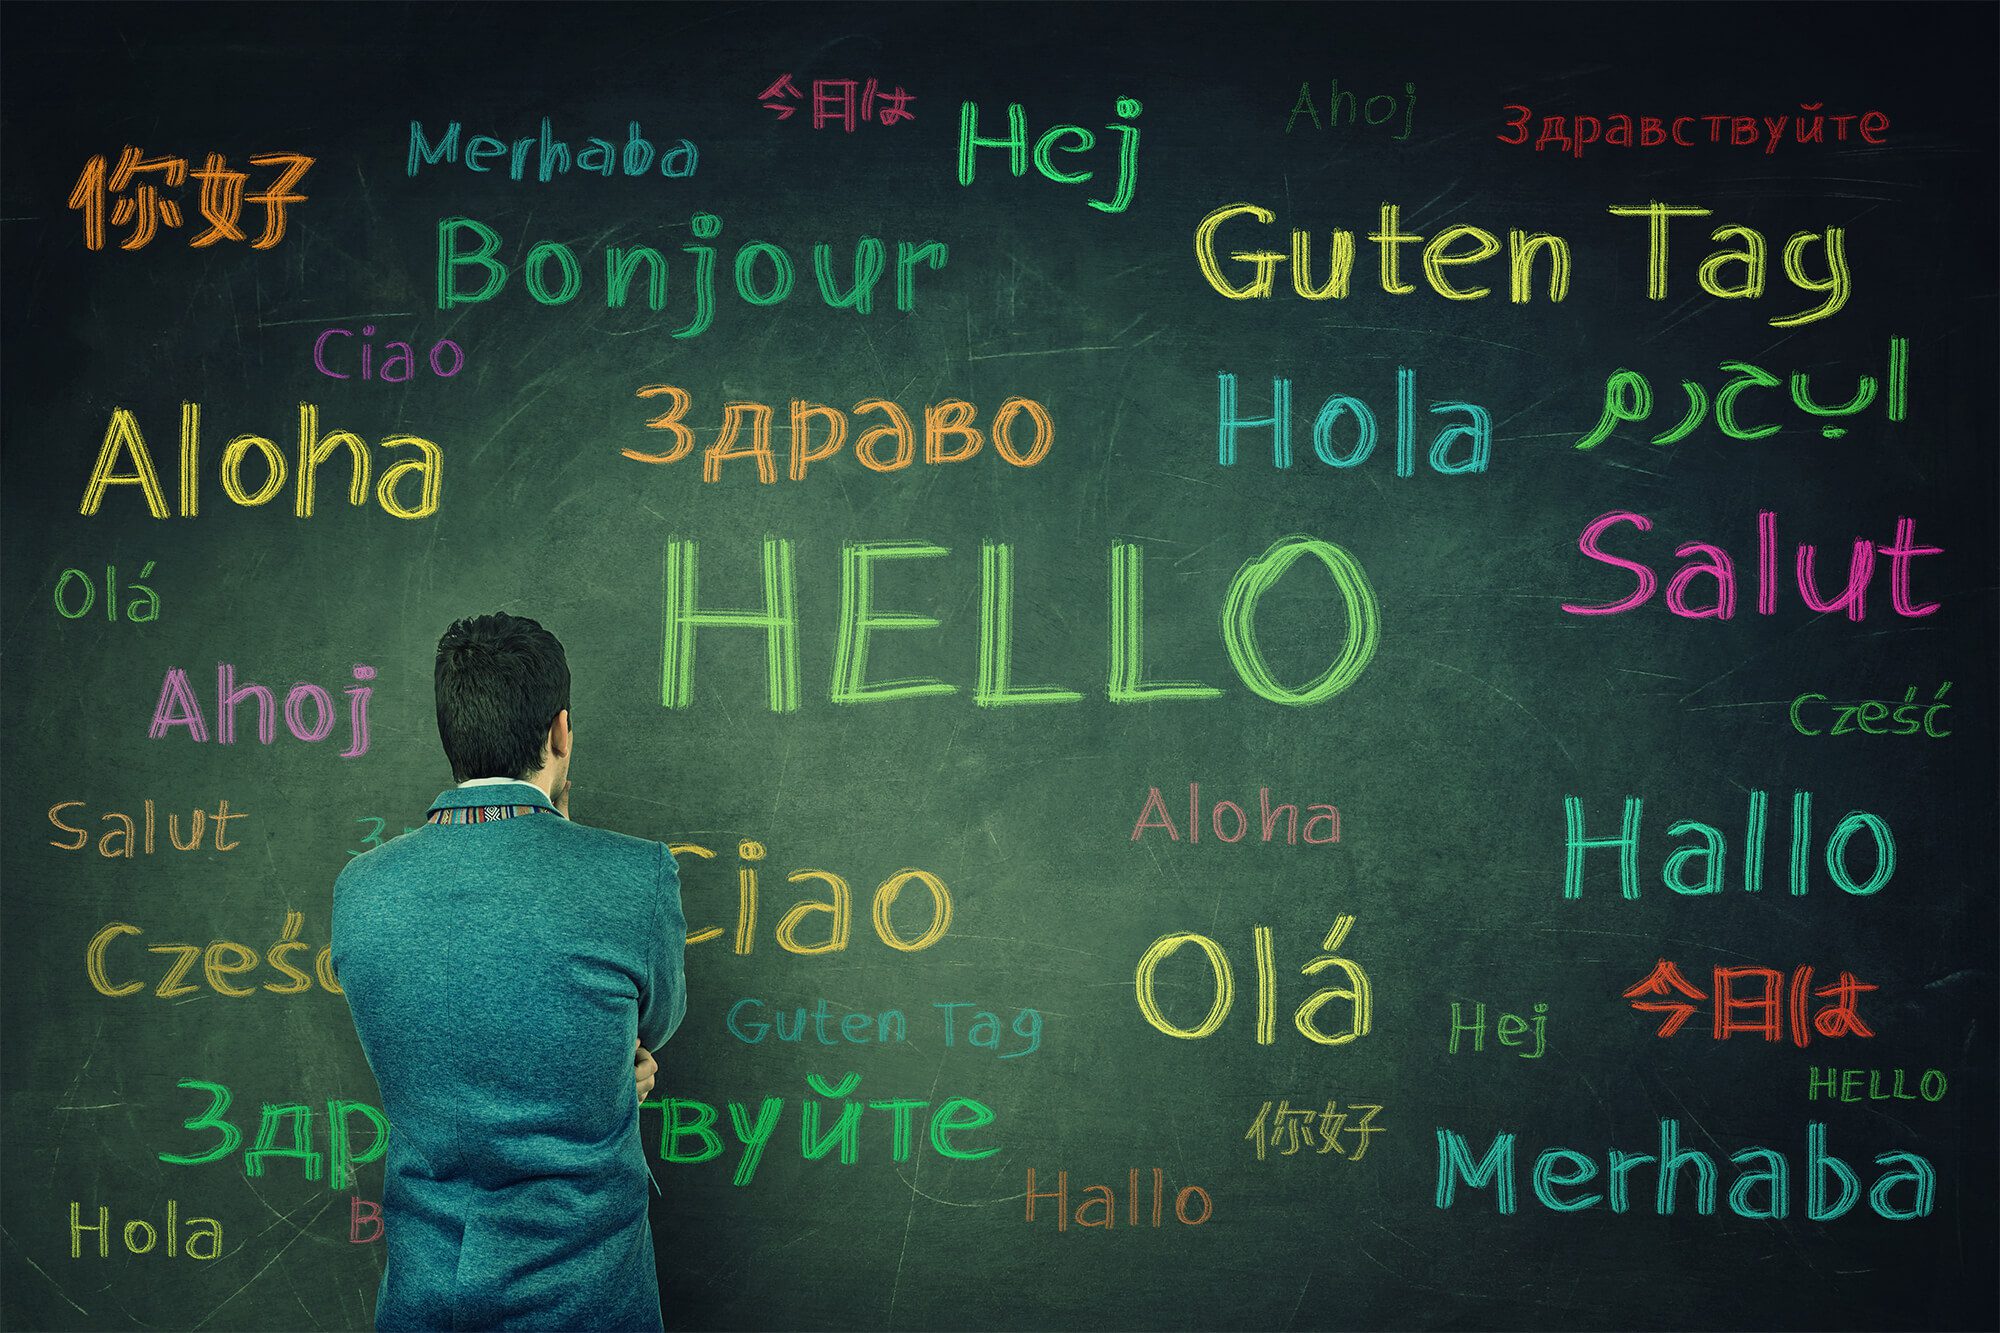 An image of the word "hello" on a blackboard in different languages.